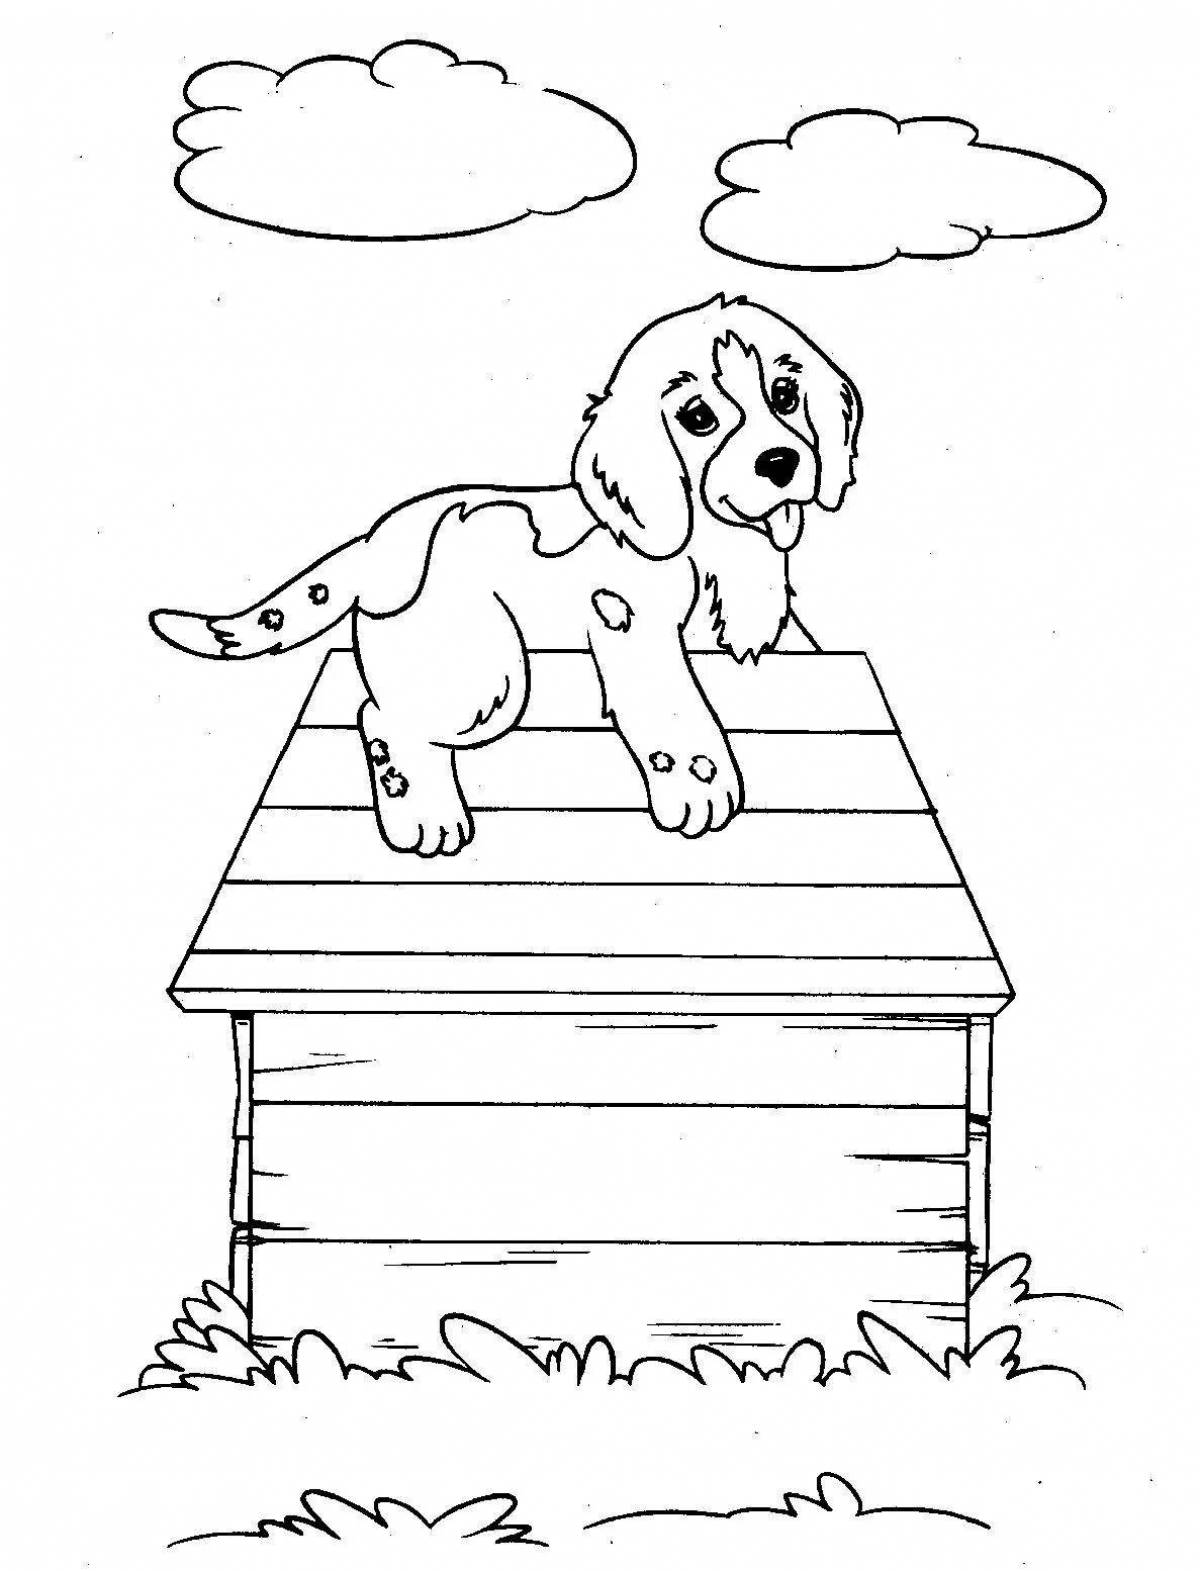 Coloring page adorable puppy Mikhalkov